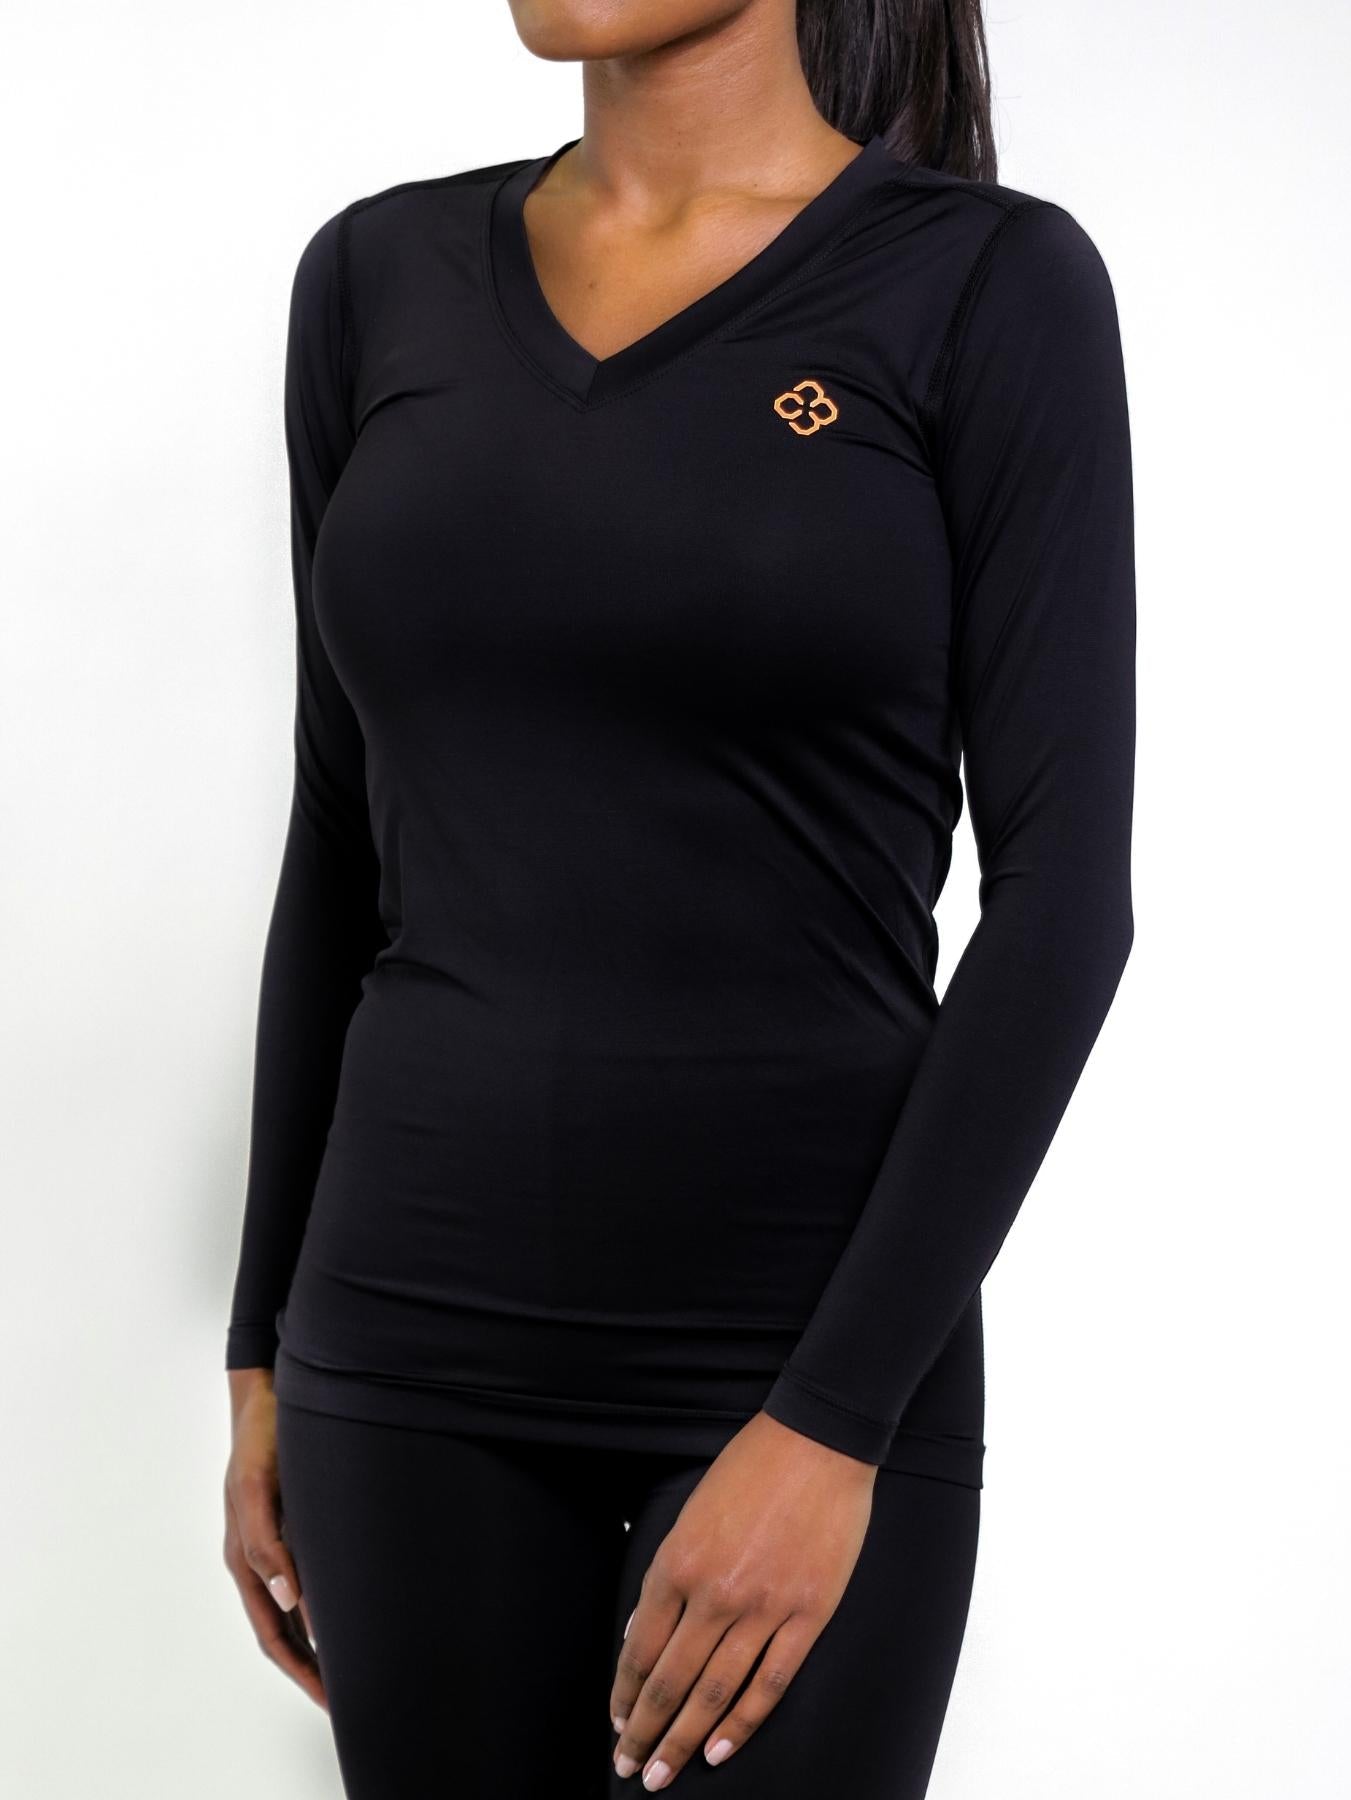 Copper Compression Long Sleeve Shirt - Ladies